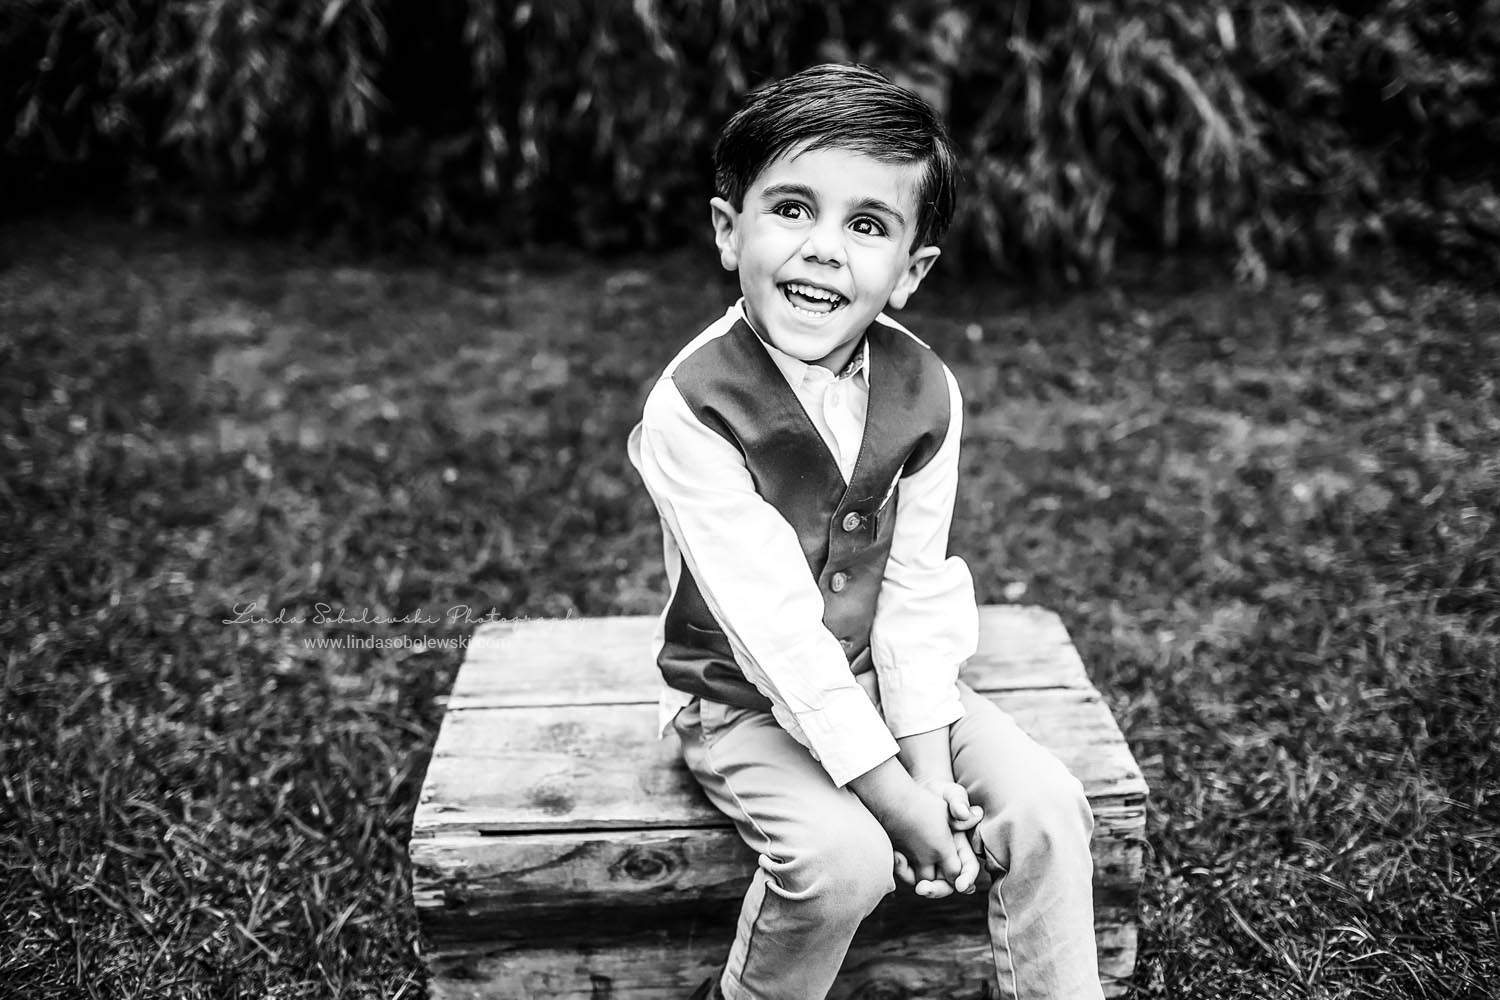 black and white image of a little boy, Child Photographer in CT